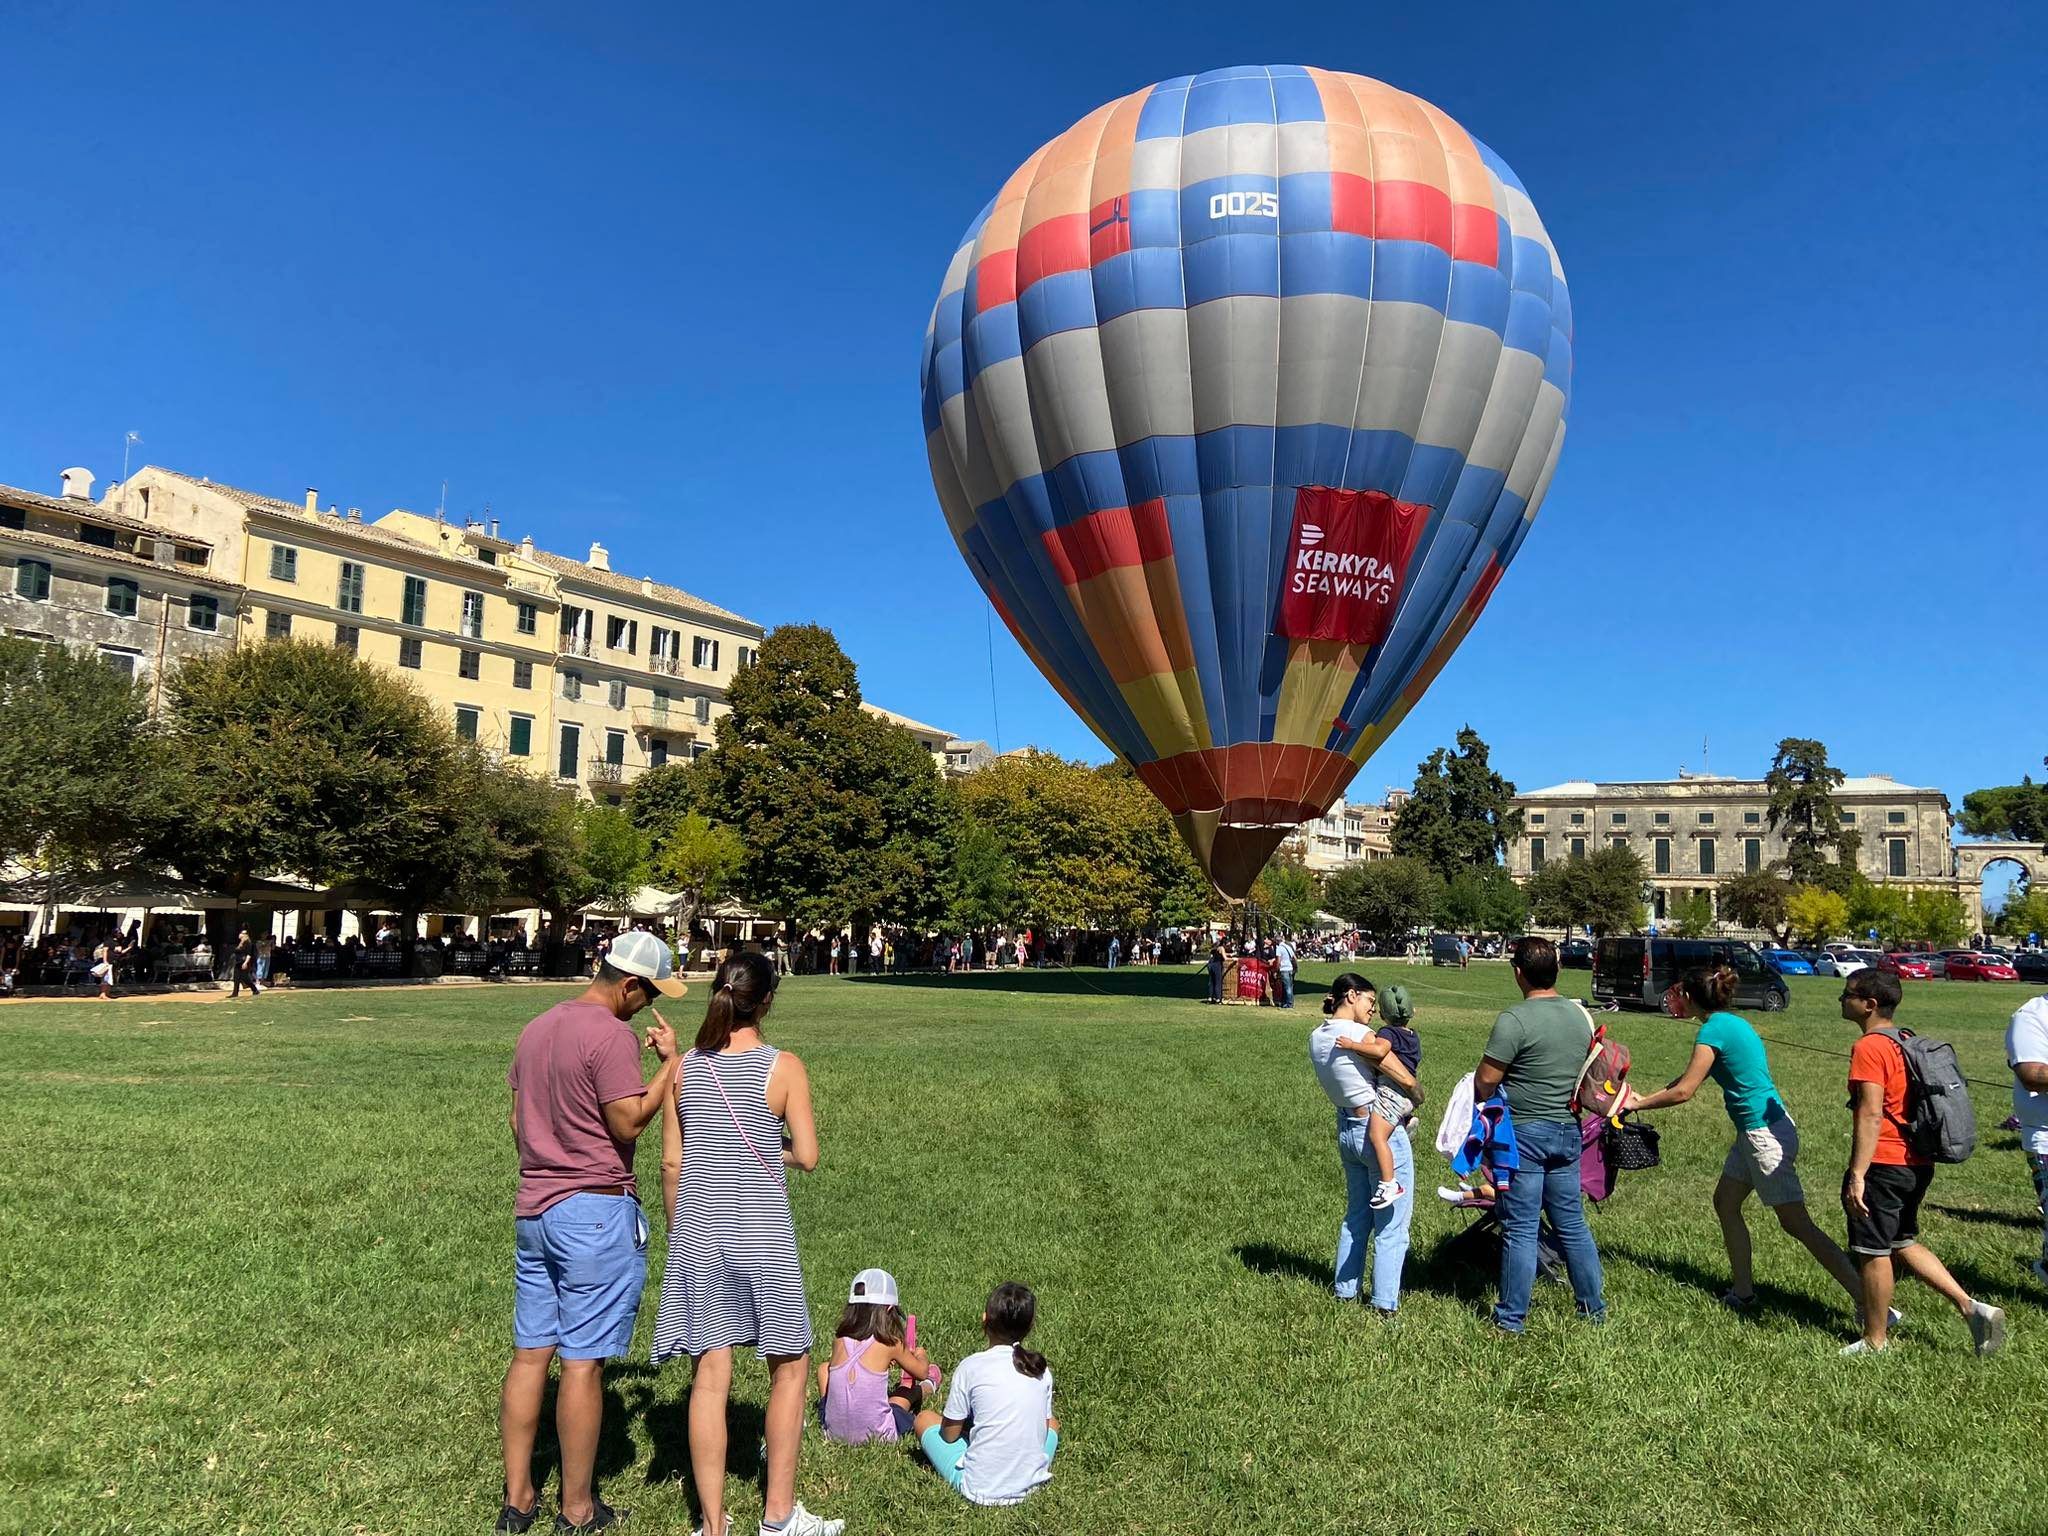 Hot air balloon in Lower Square today